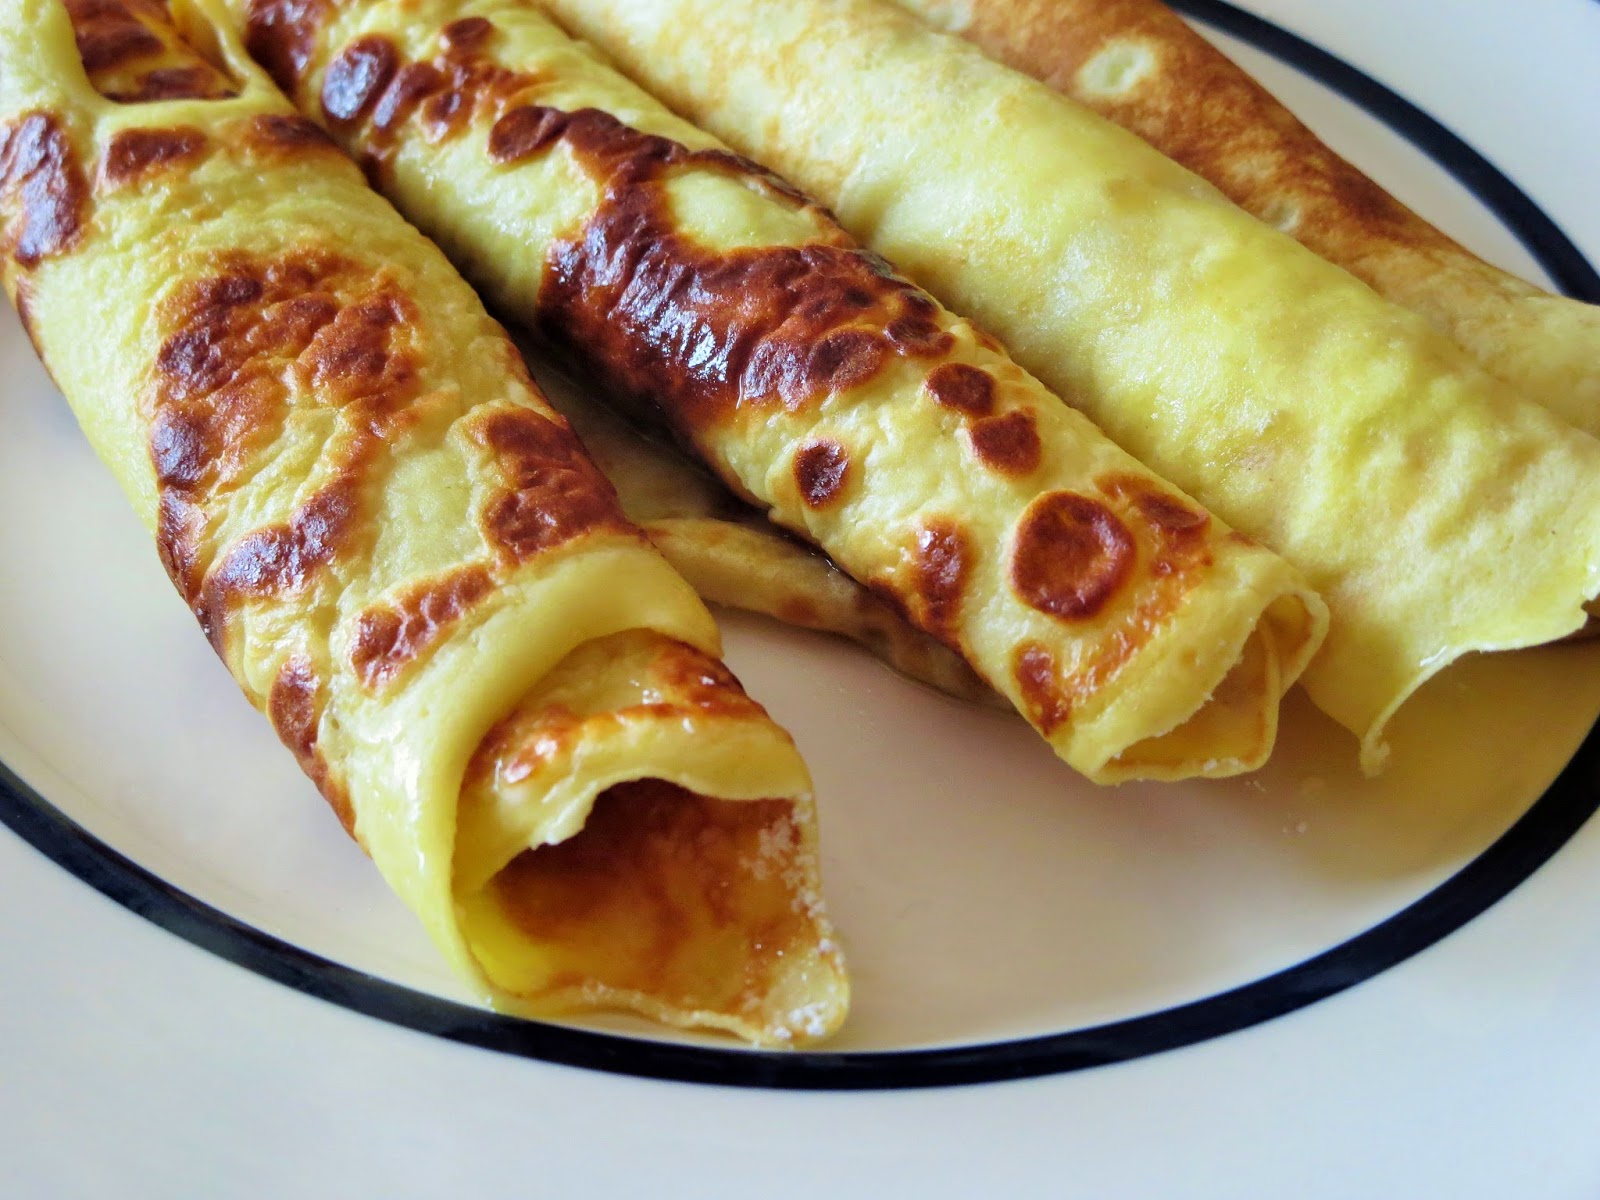 Ramona Avenue: Crepes-Or Roll up pancakes